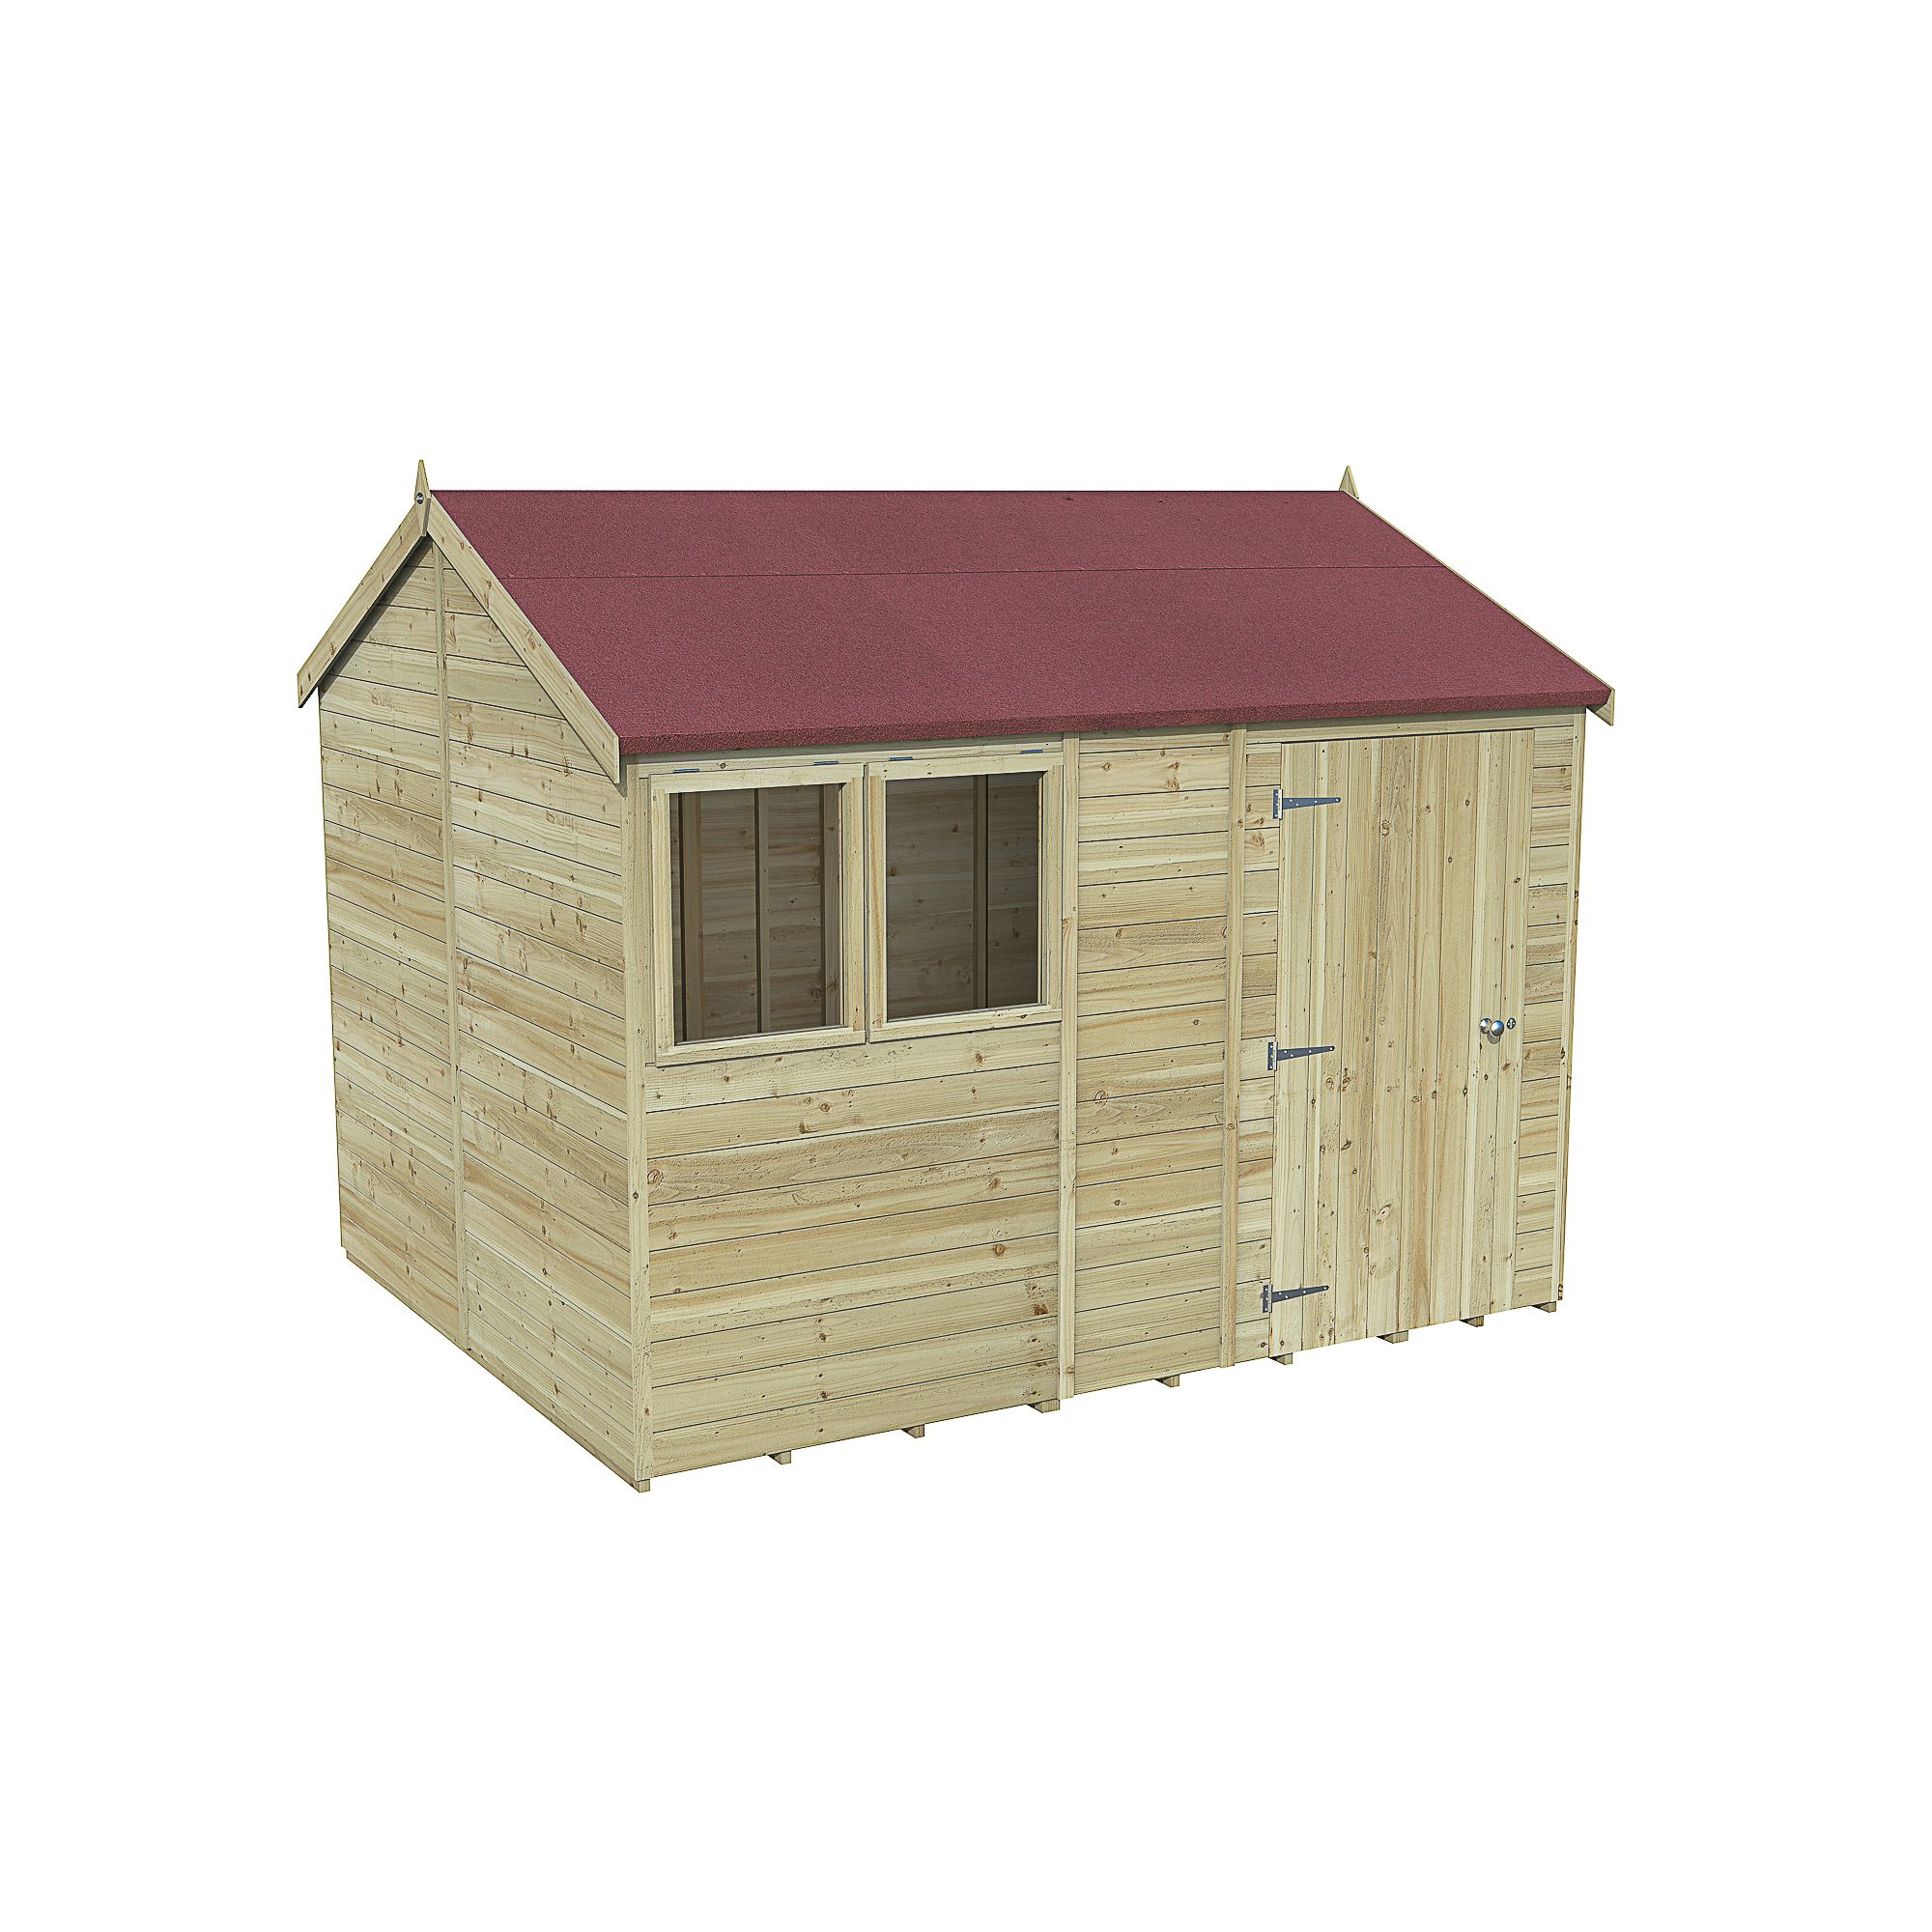 Forest Garden Timberdale 10x8 ft Reverse apex Wooden Shed with floor